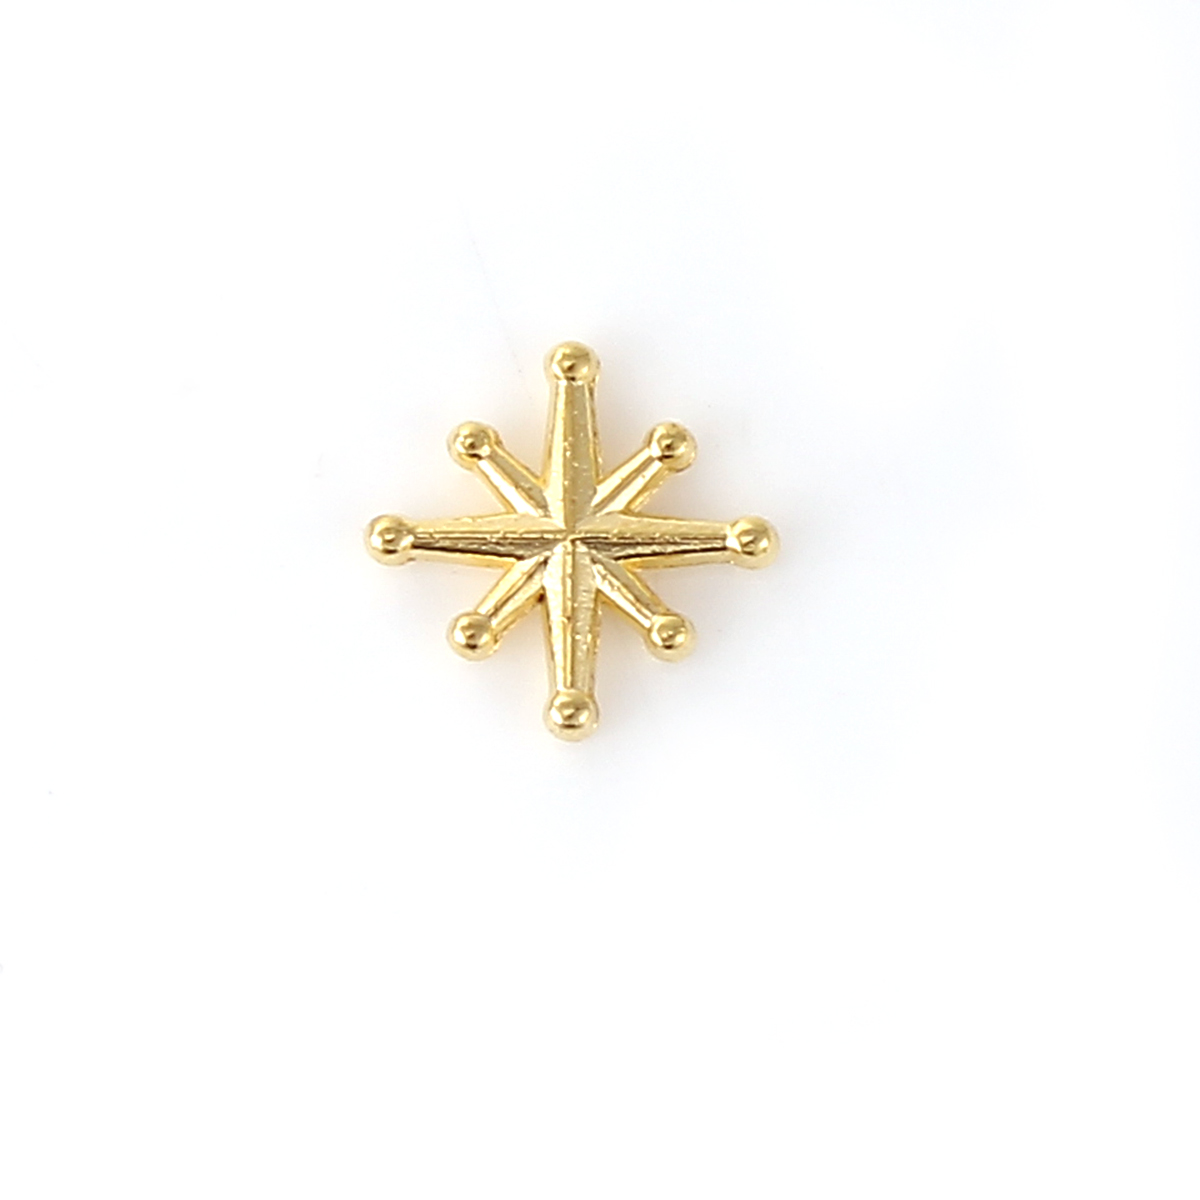 Picture of Zinc Based Alloy Resin Jewelry Tools Star Gold Plated 10mm( 3/8") x 10mm( 3/8"), 20 PCs